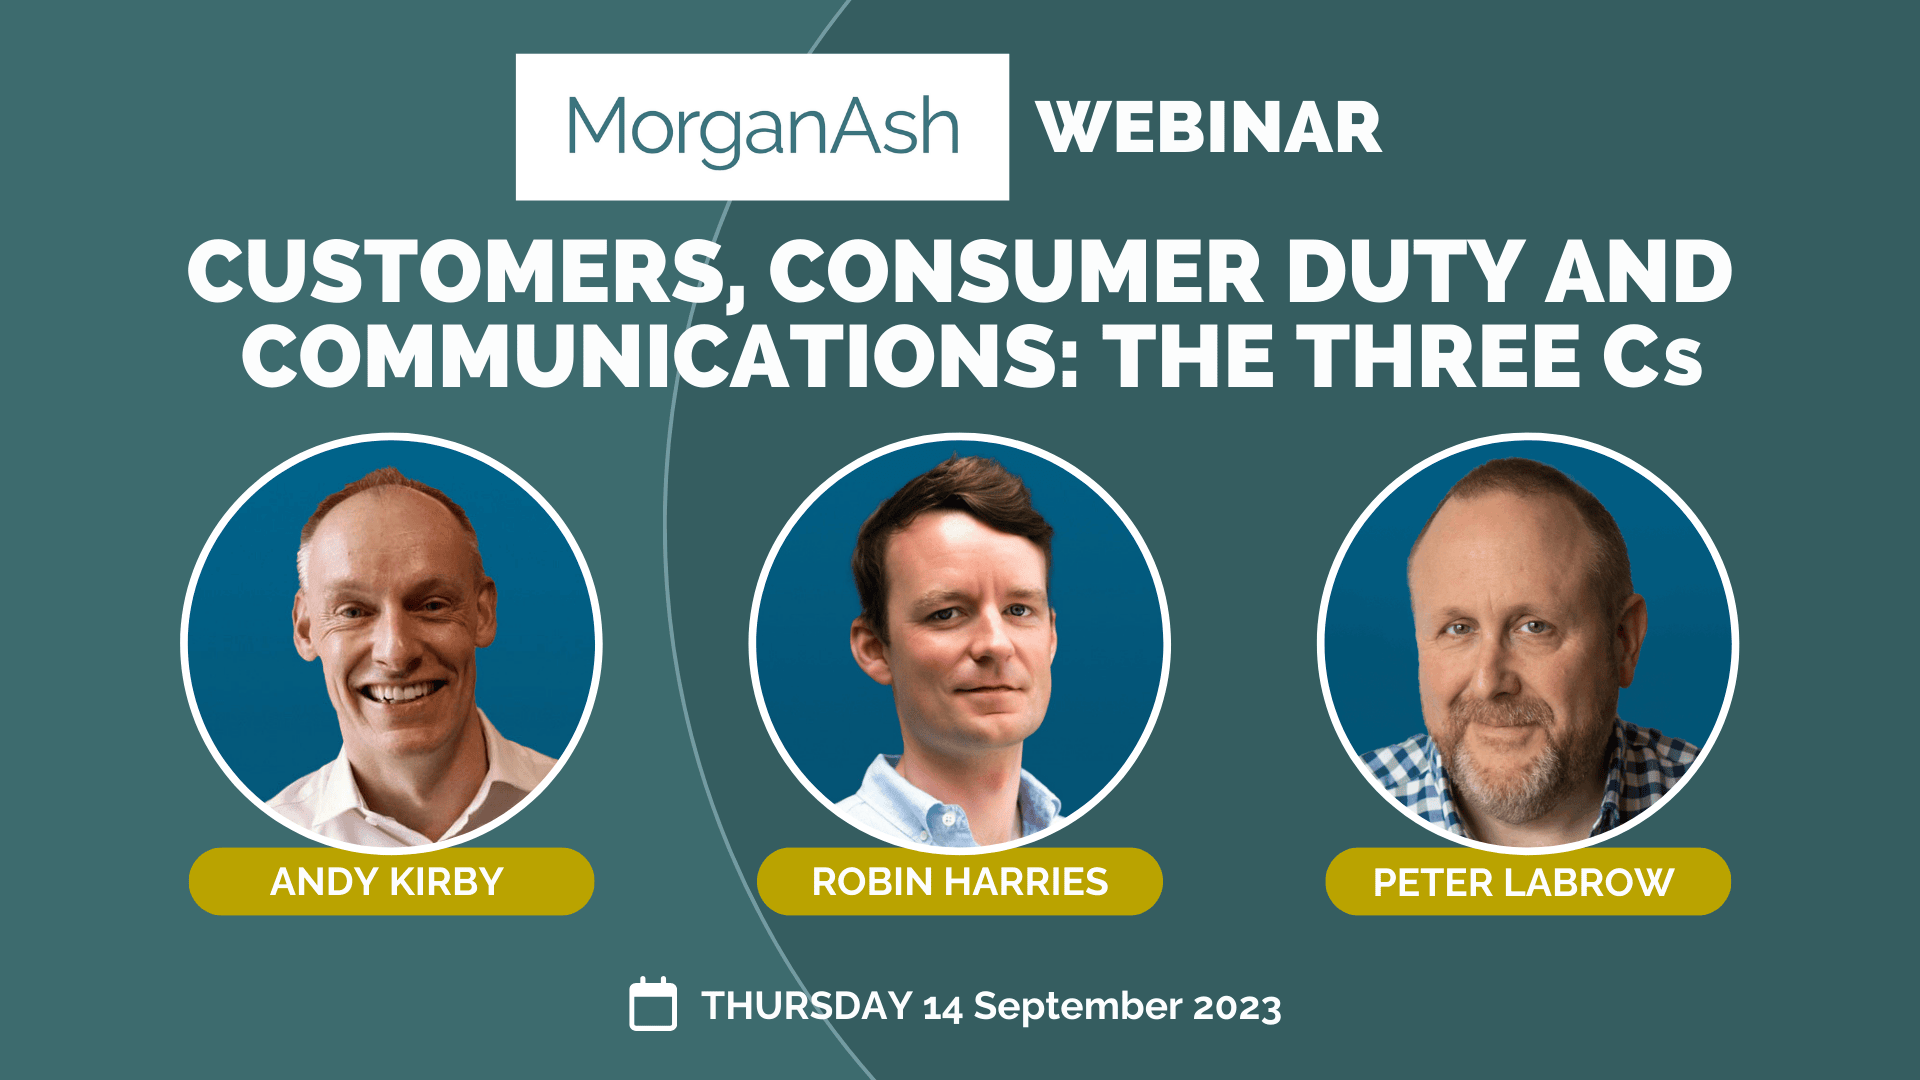 The three Cs: customers, Consumer Duty and communications